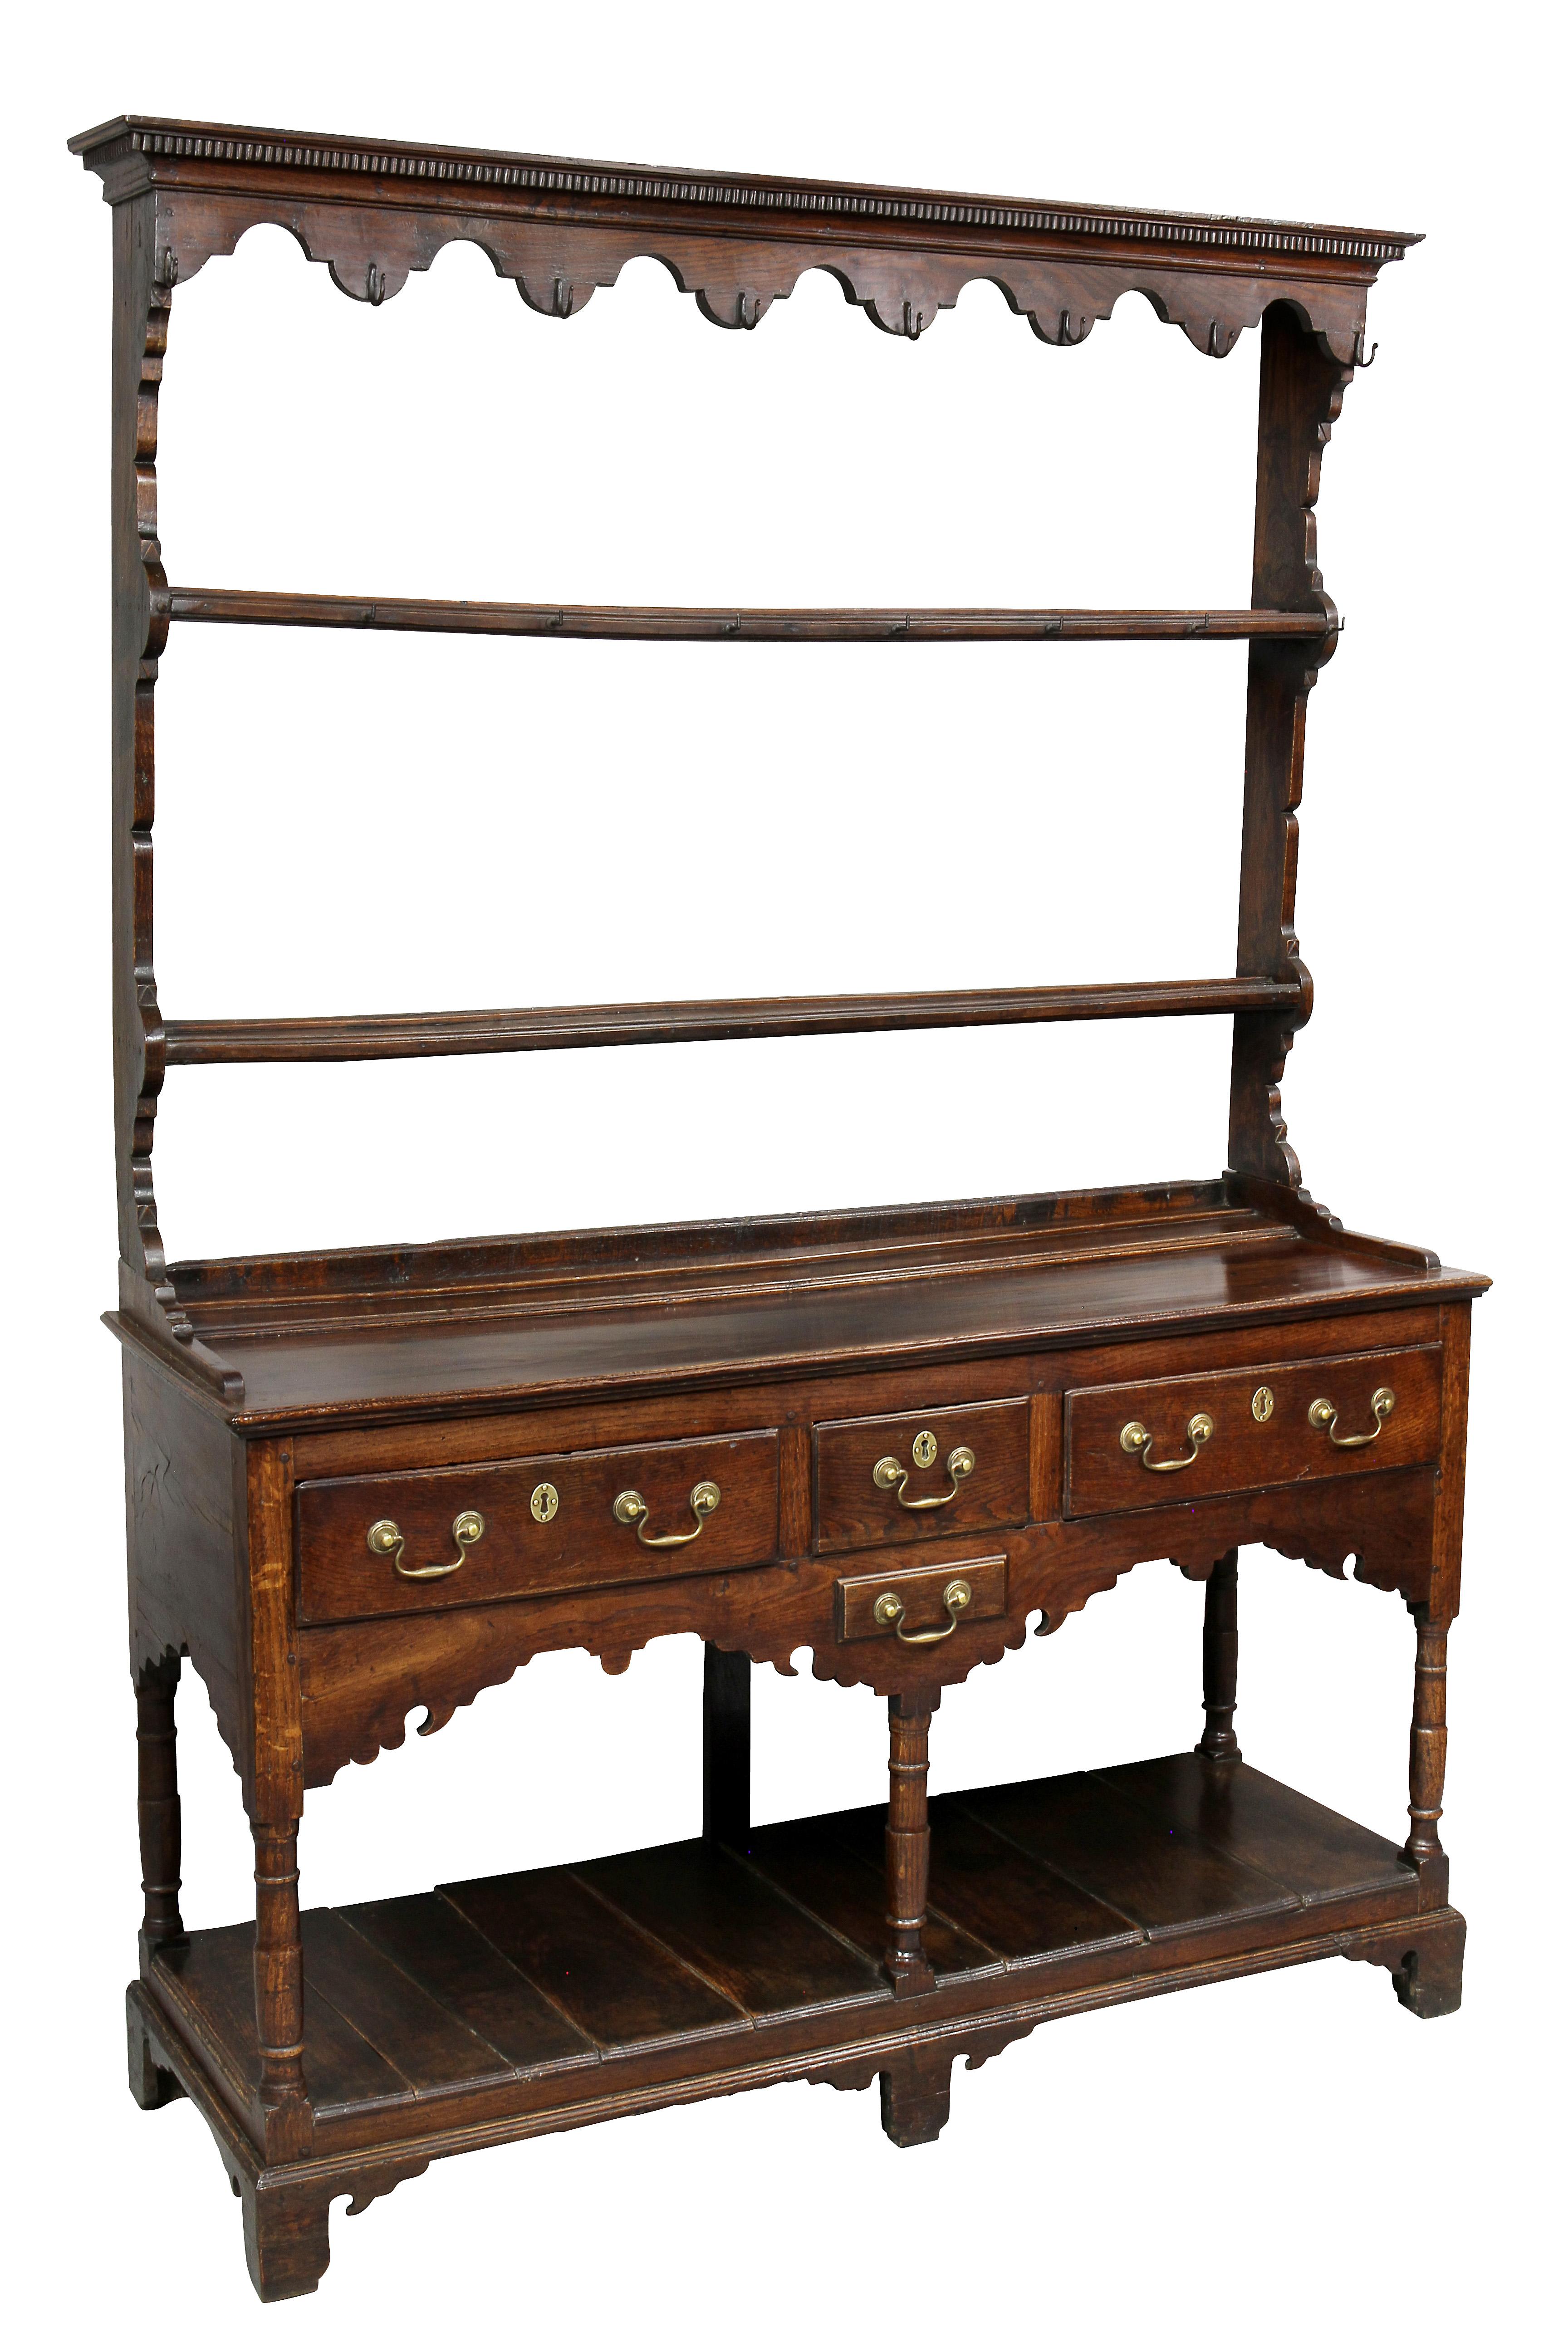 In two parts, with rectangular dentilled cornice and shaped frieze with iron cup hooks, two shelves, the base with a rectangular top over a small drawer flanked by two drawers, shaped apron containing a small drawer and lower pot shelf, bracket feet.